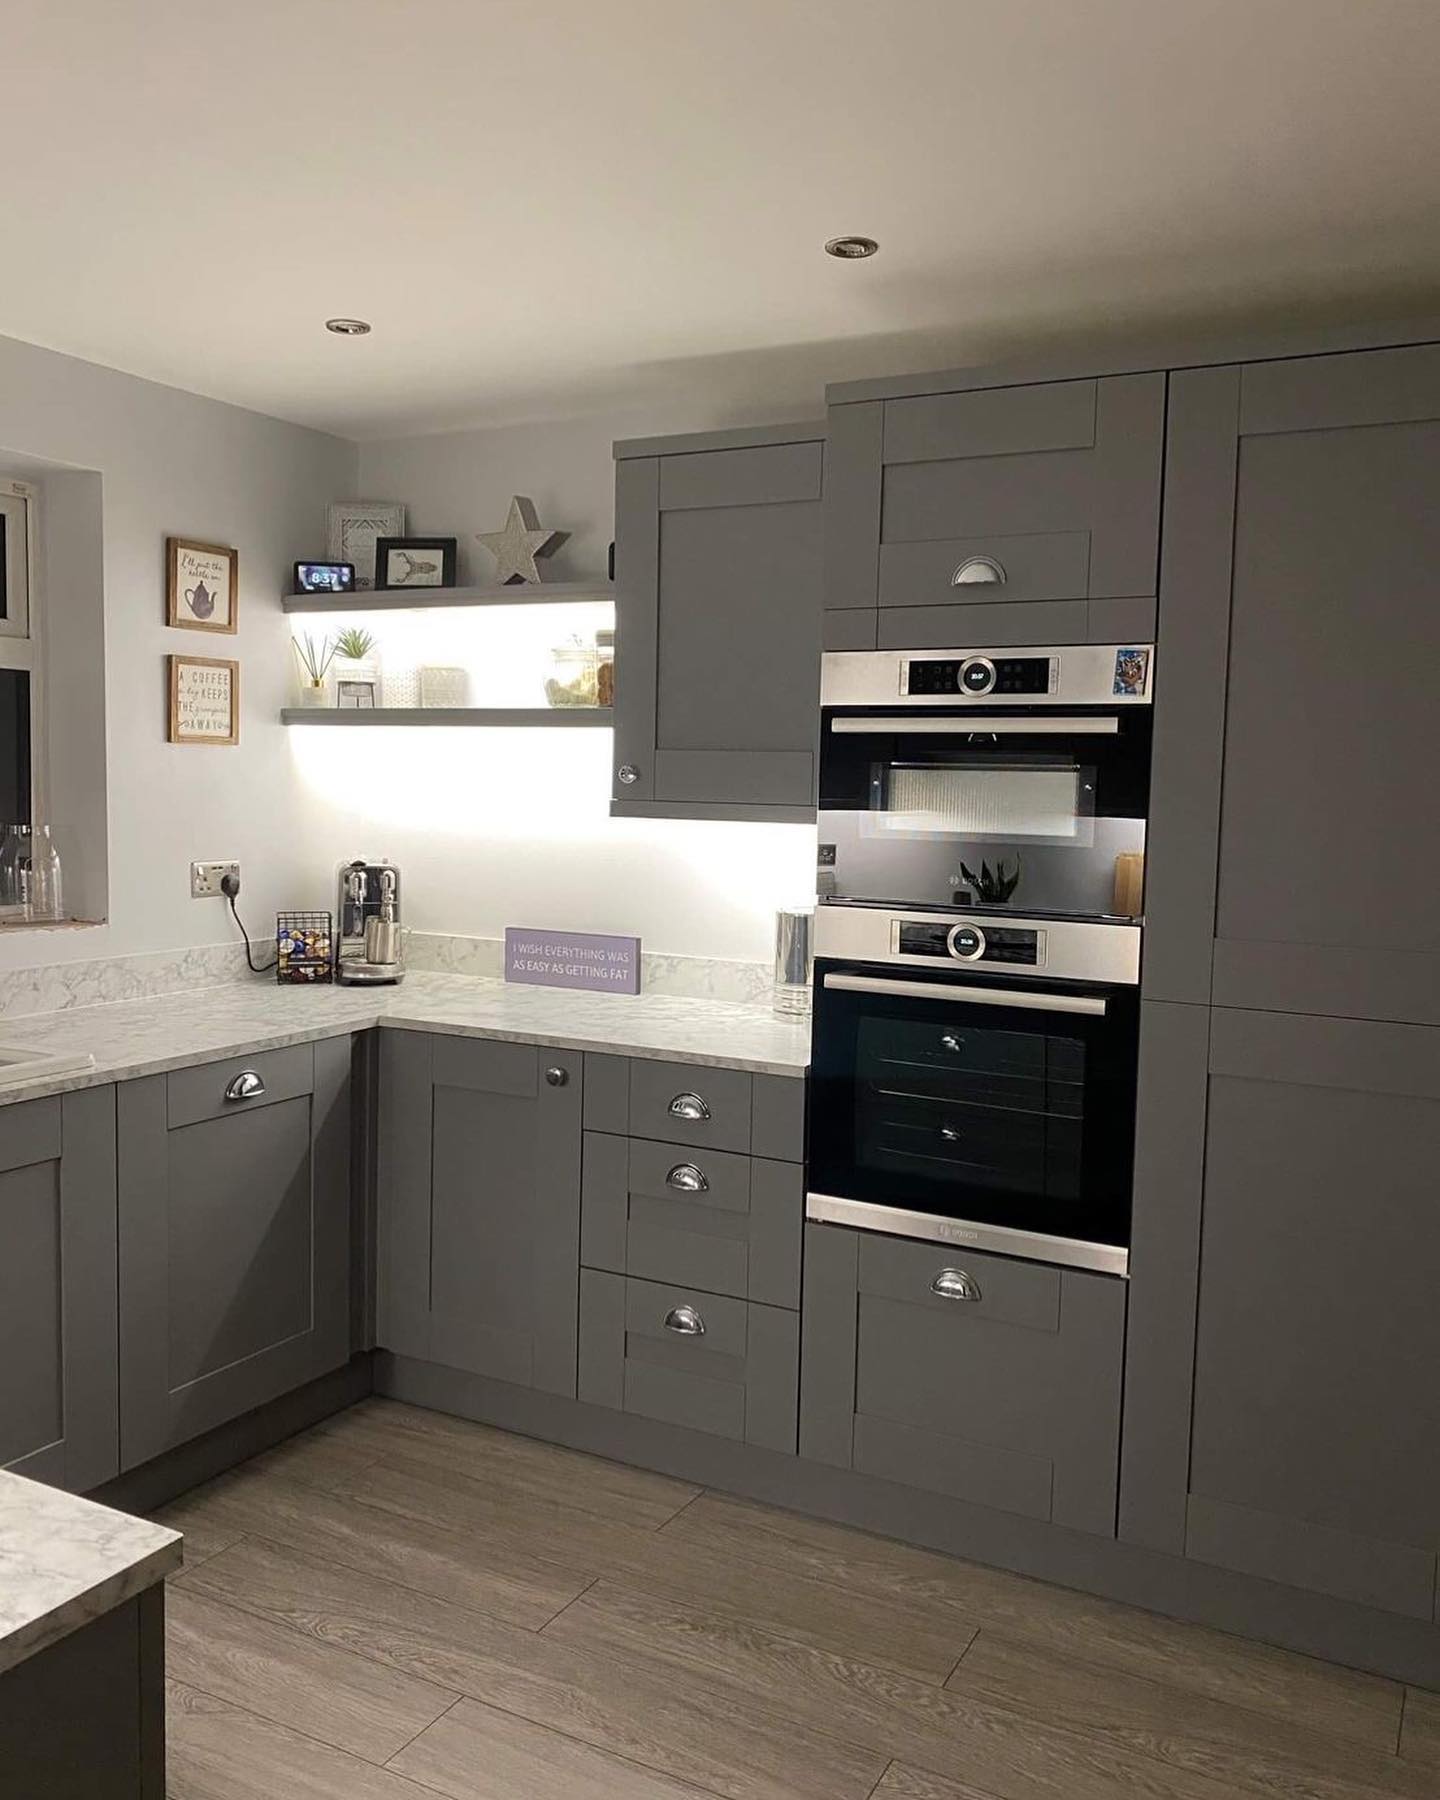 Grey Kitchen Cabinets in new build with Double Neff Oven at comfort height